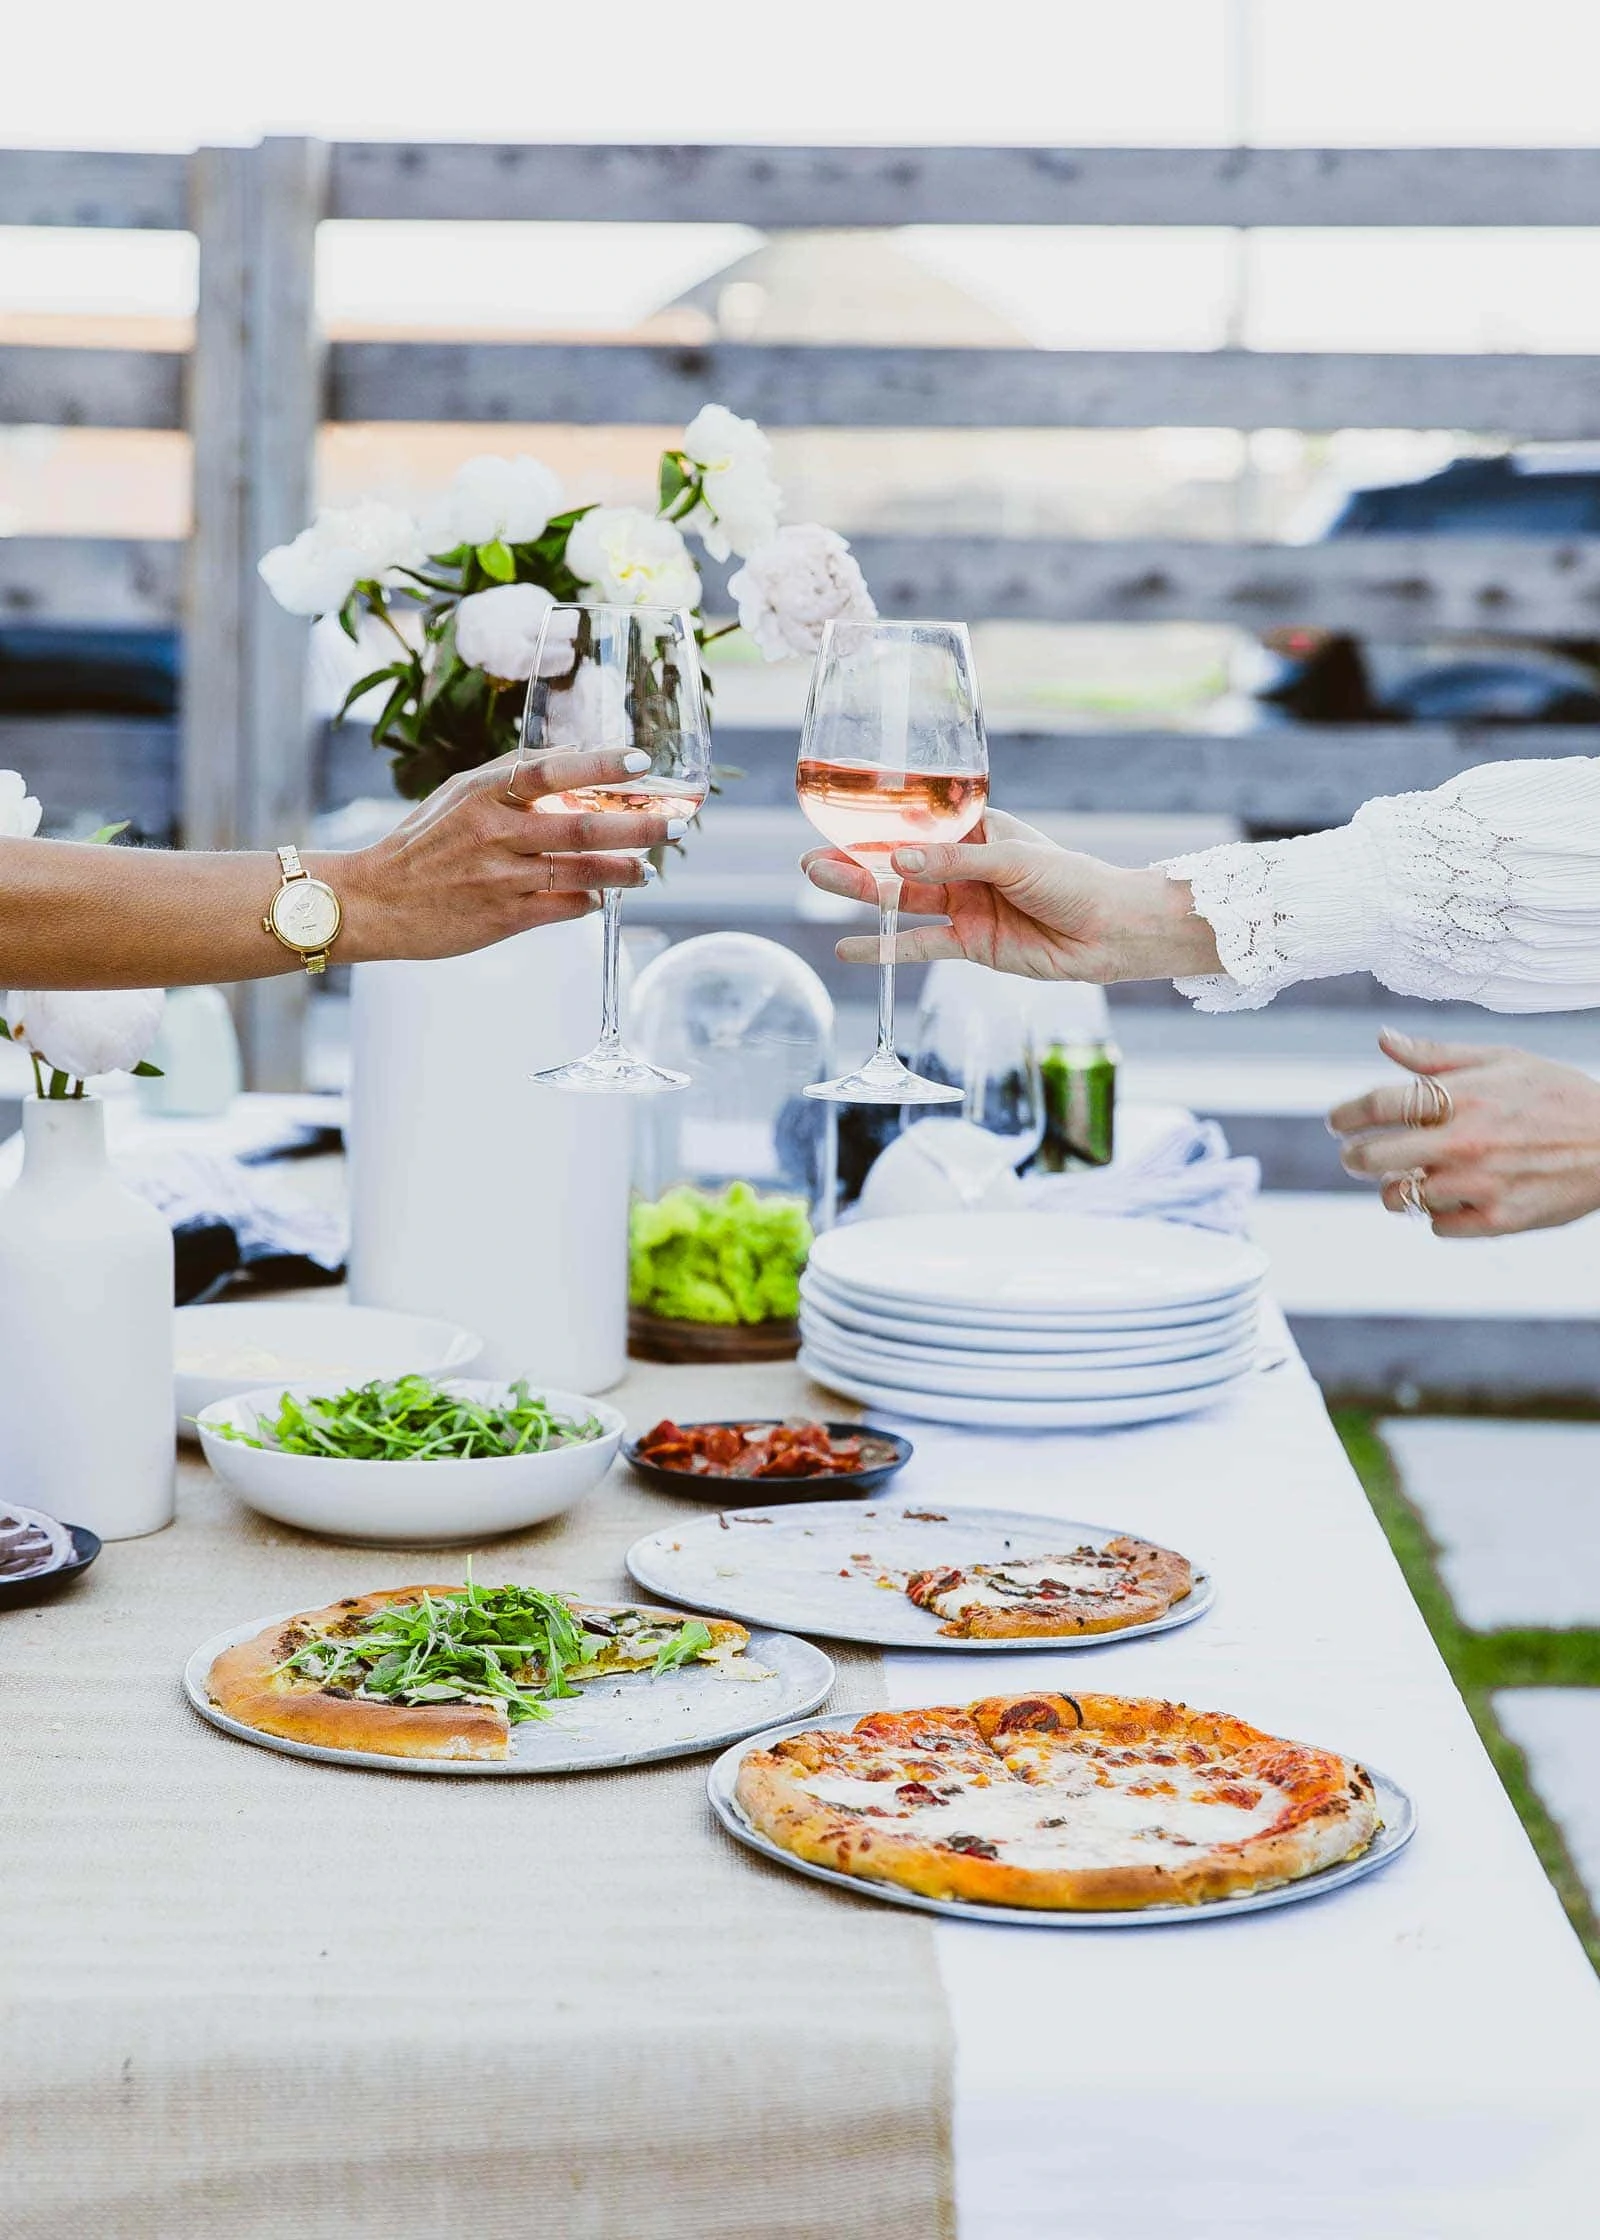 How To Host The Most Epic Pizza Party. Less than 1 hour of prep and you've got yourself a sensational spread that will excite everyone!